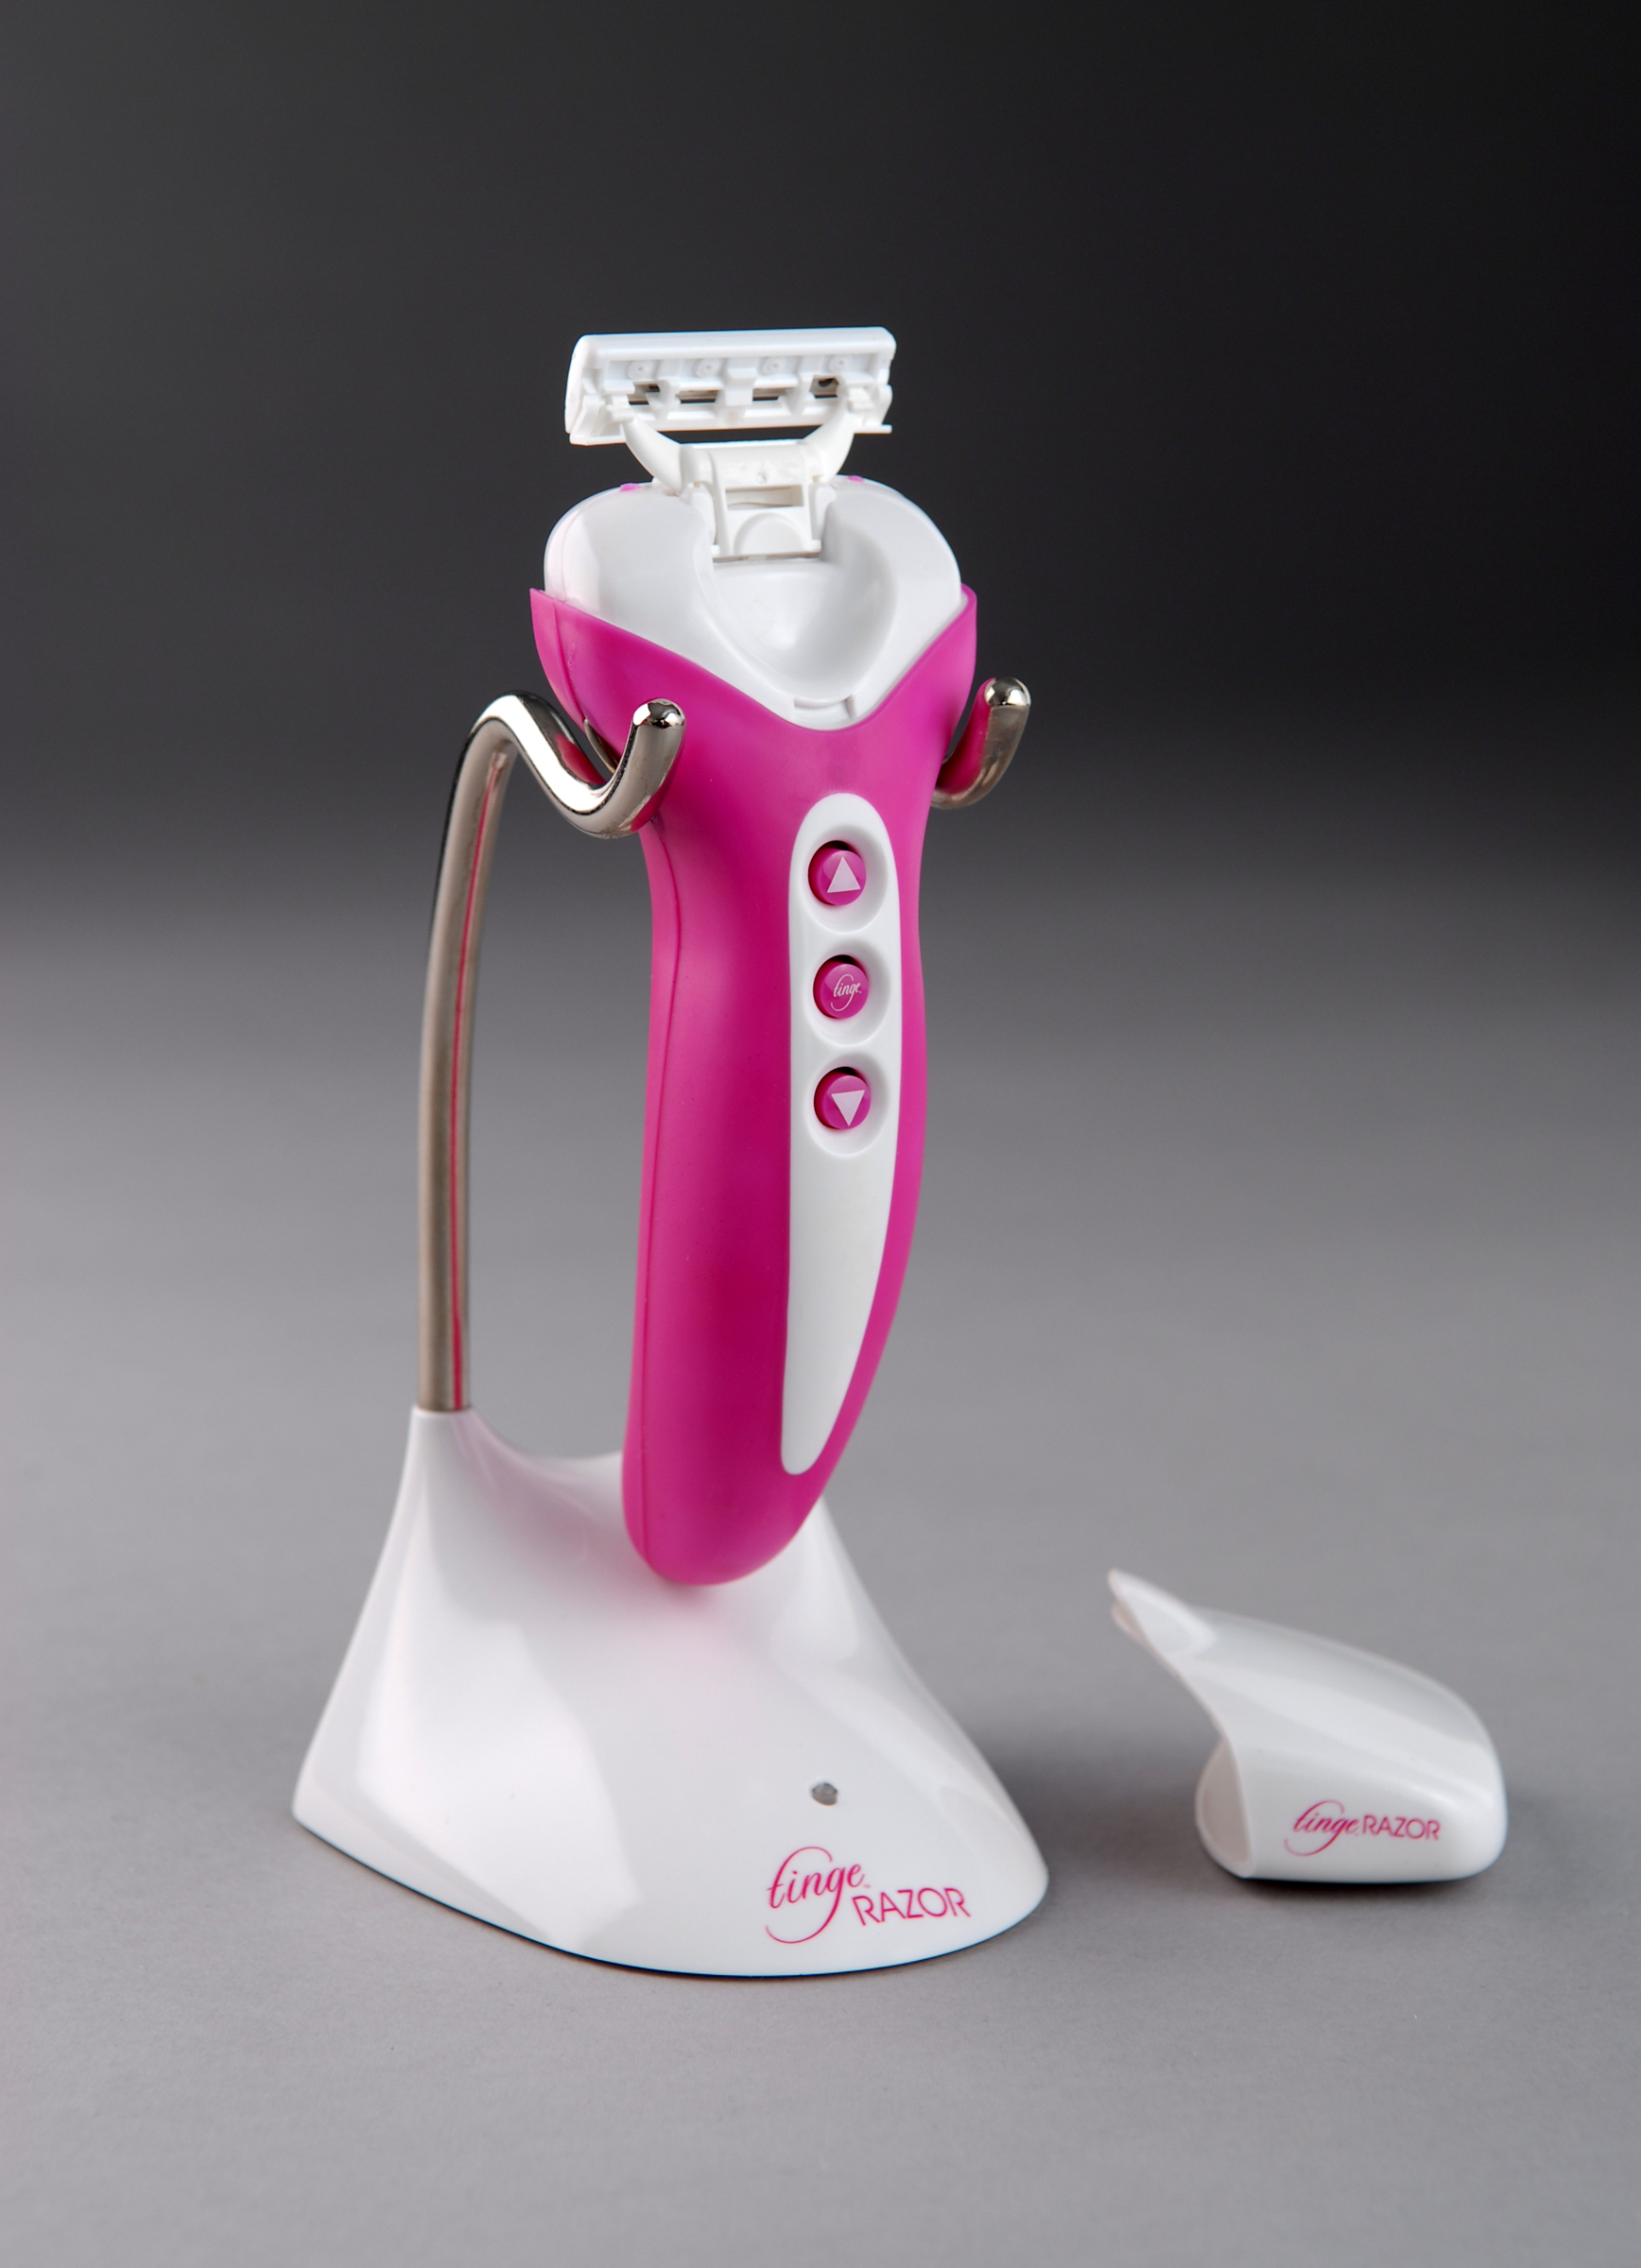 Tinge® Offers Discreet Luxury Vibrator Disguised As A Razor Woman